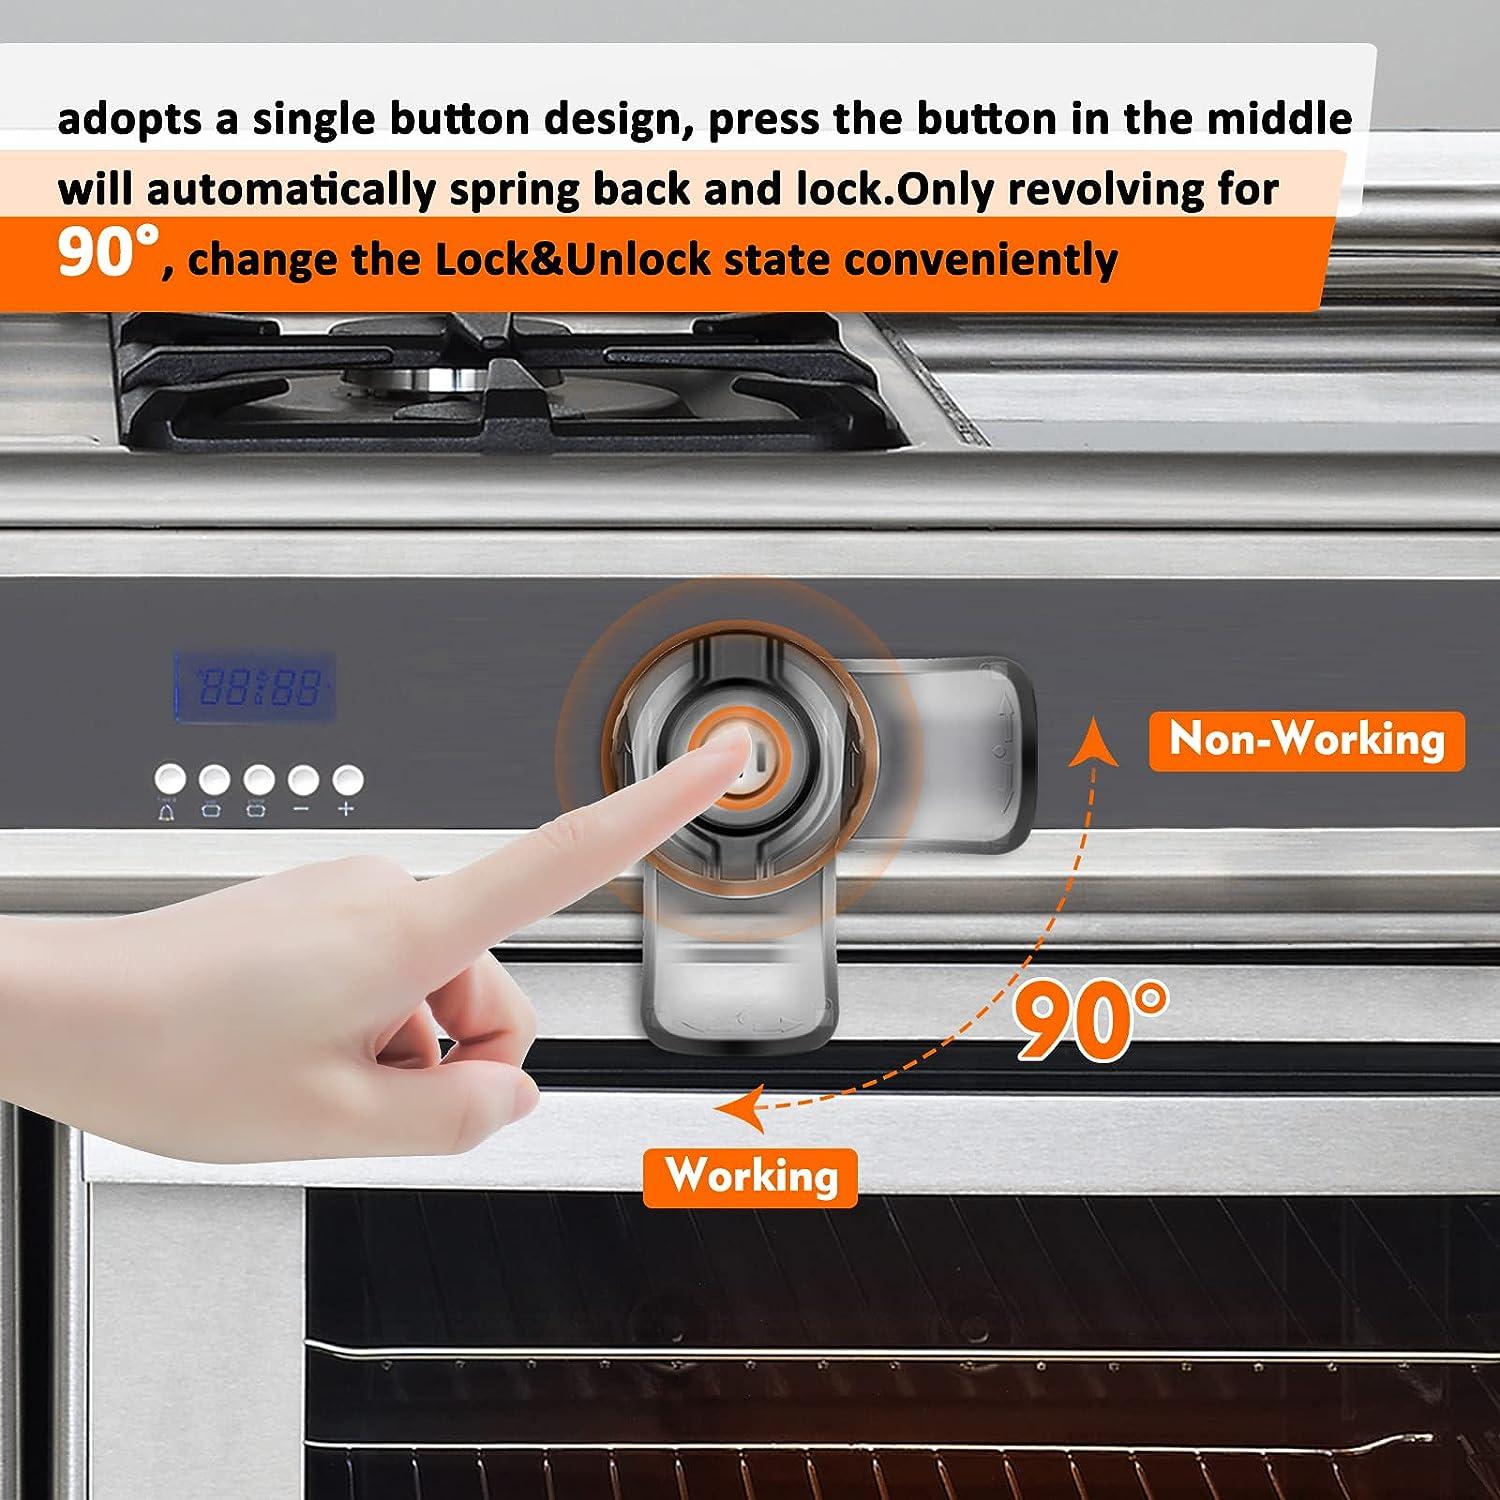 2pcs Childproof Oven Door Lock Baby Safety Oven Lock Kitchen Baby Safety  Lock 